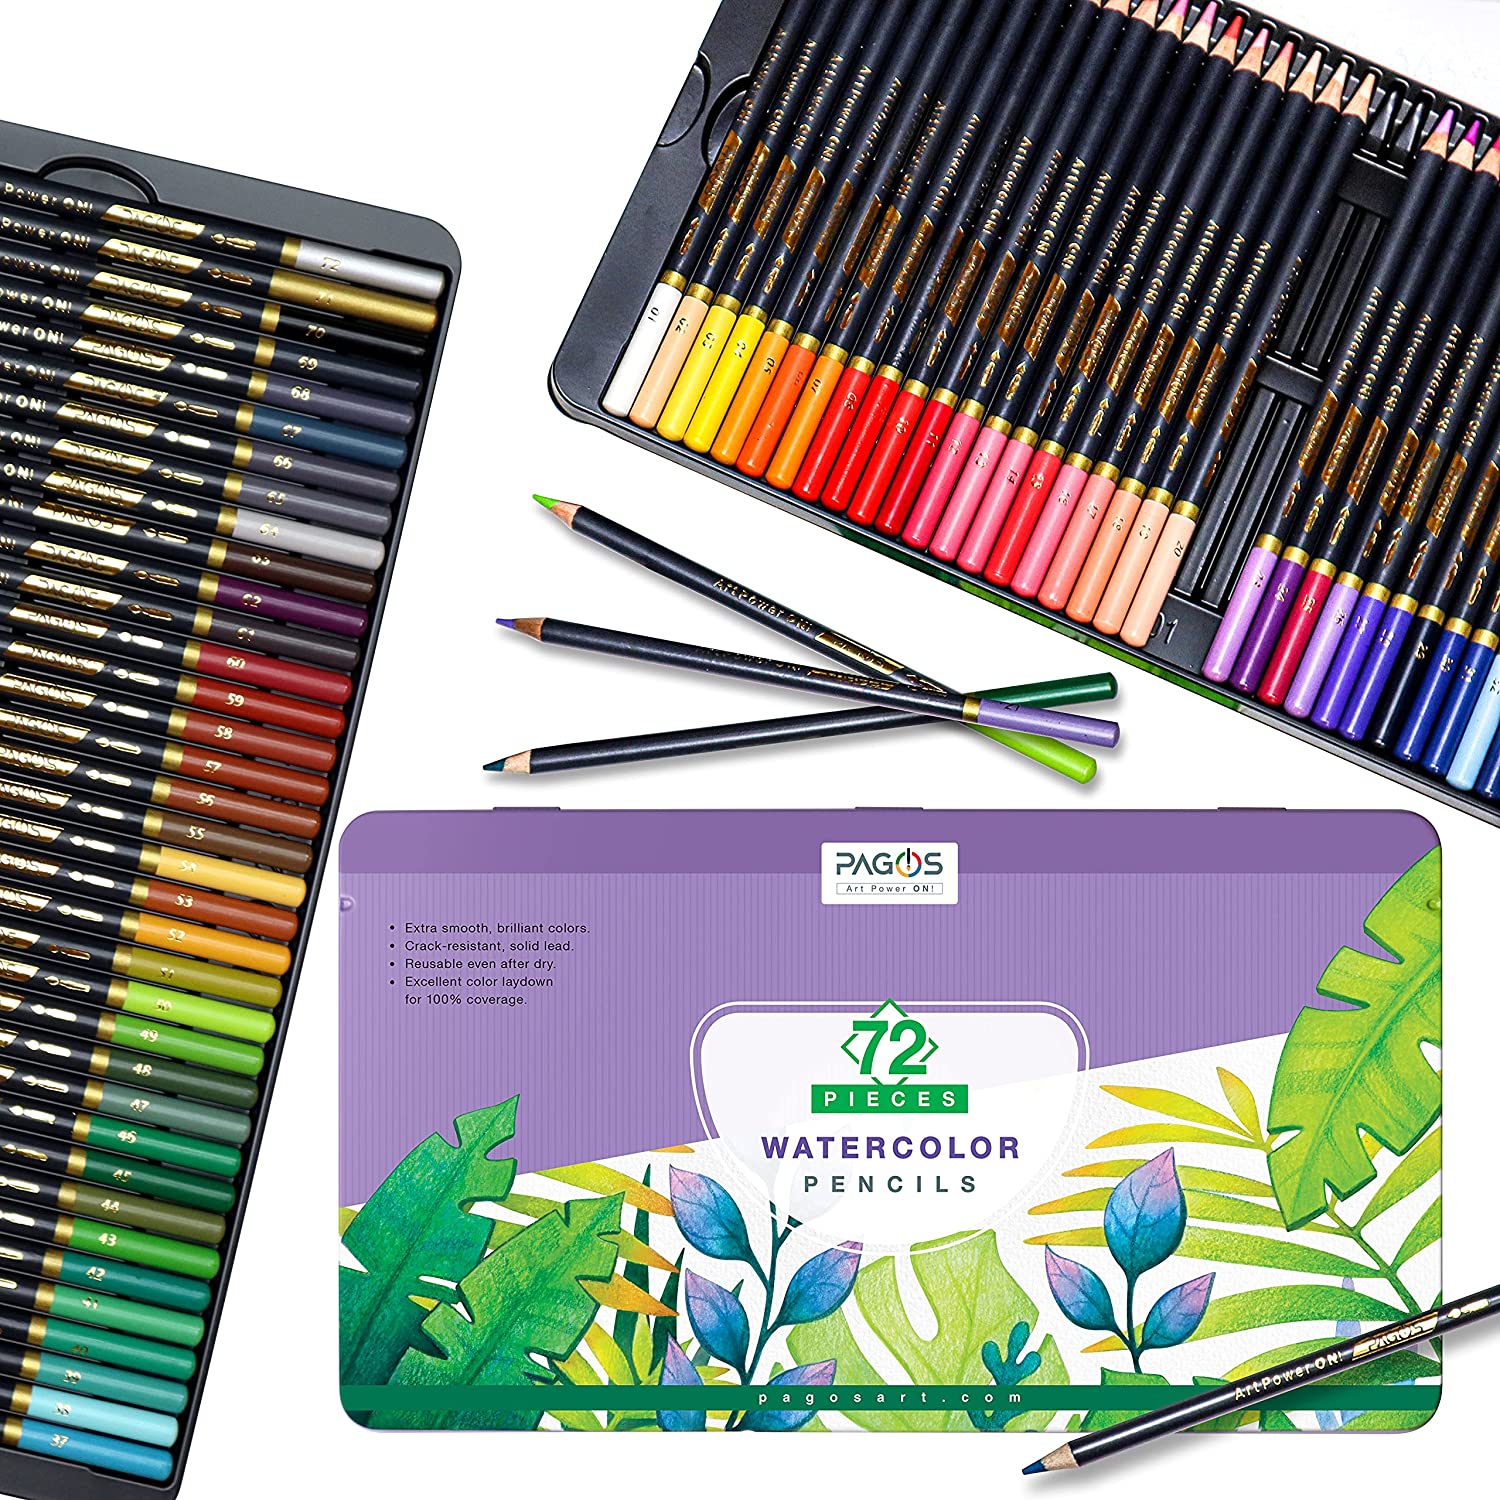 PAGOS Watercolor Pencils Set – 72 Professional Drawing Pencils for Kids  Adults Artists, Art Supplies for Coloring, Creating Beautiful Blending  Effects